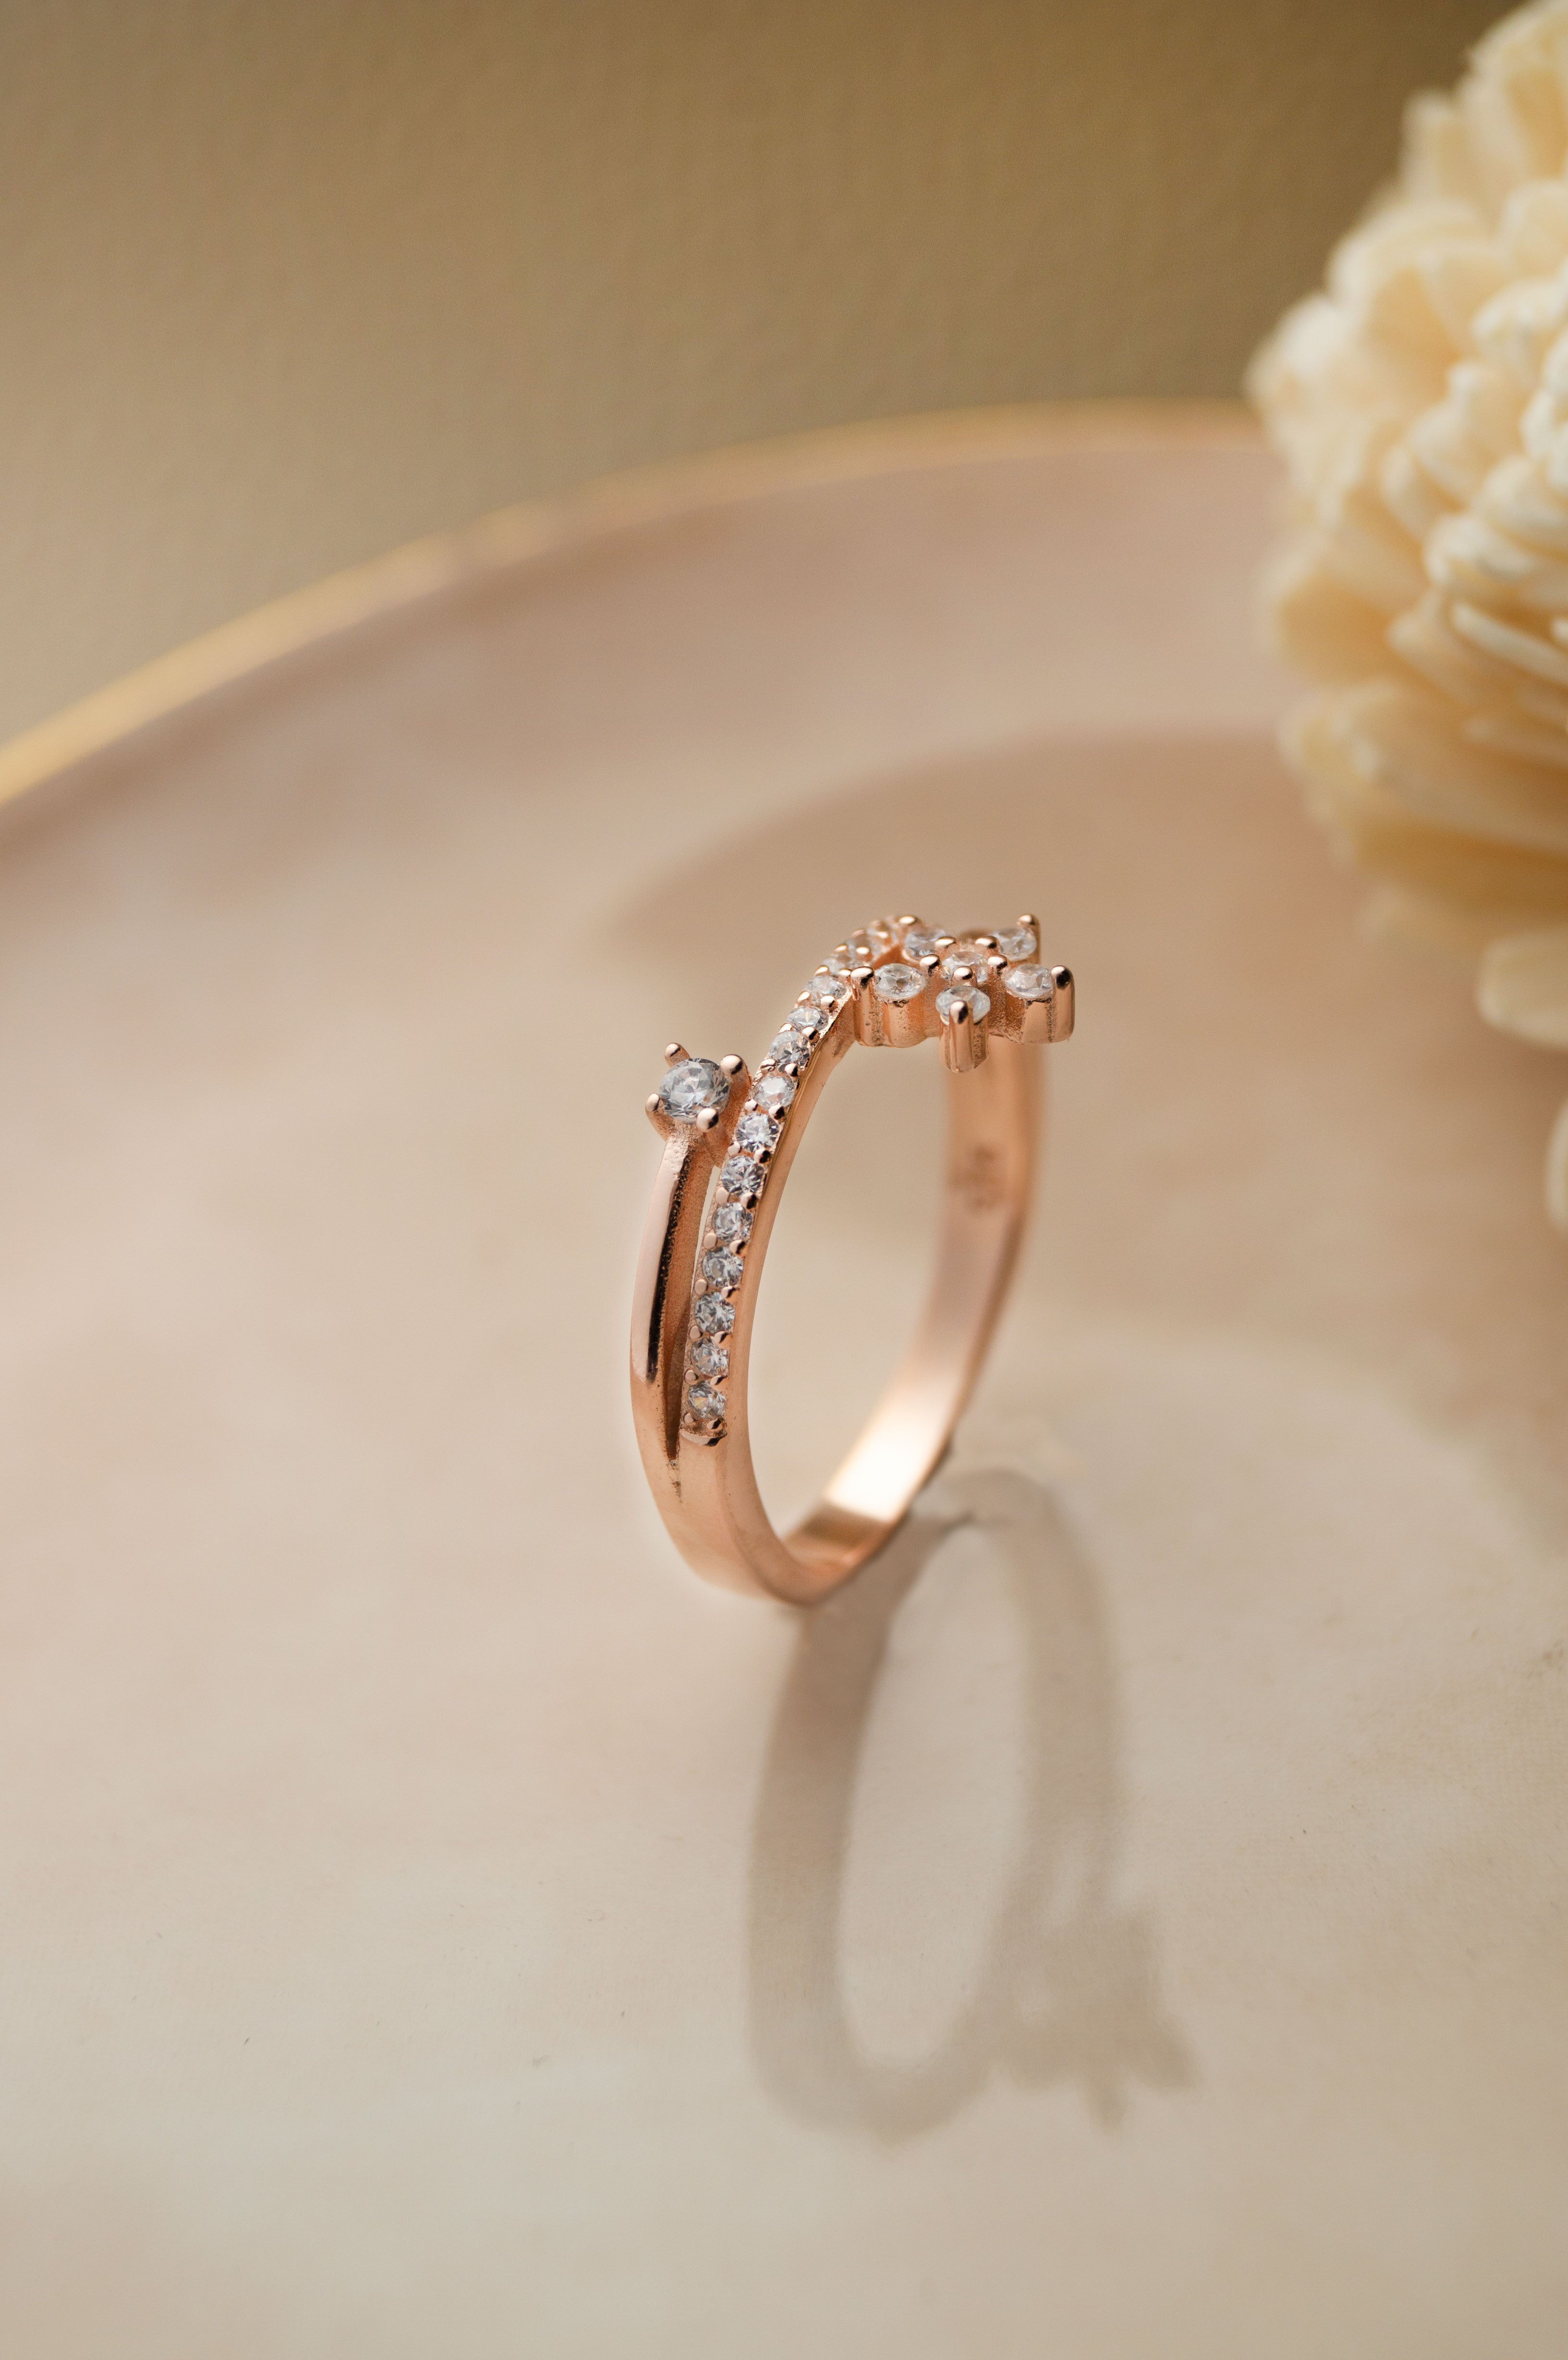 Waterproof* Wavy Two Row Ring: Gold, Silver Or Rose - Nissa Jewelry